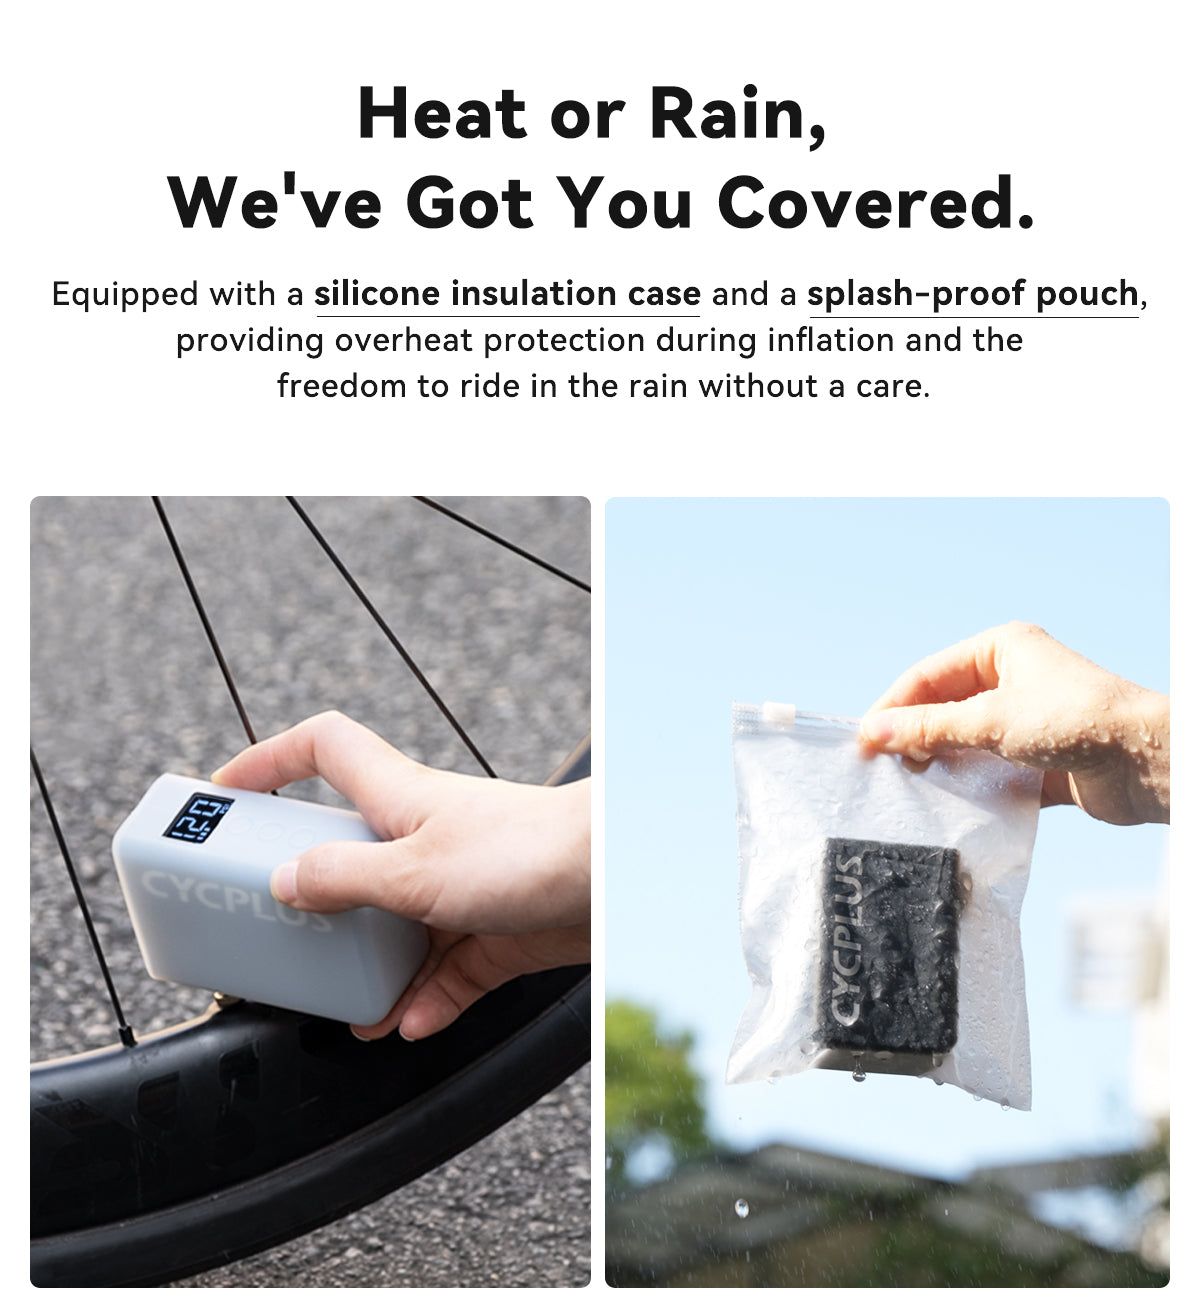 Heat or Rain, We've Got You Covered.  Equipped with a silicone insulation case and a splash-proof pouch, providing overheat protection during inflation and the freedom to ride in the rain without a care.